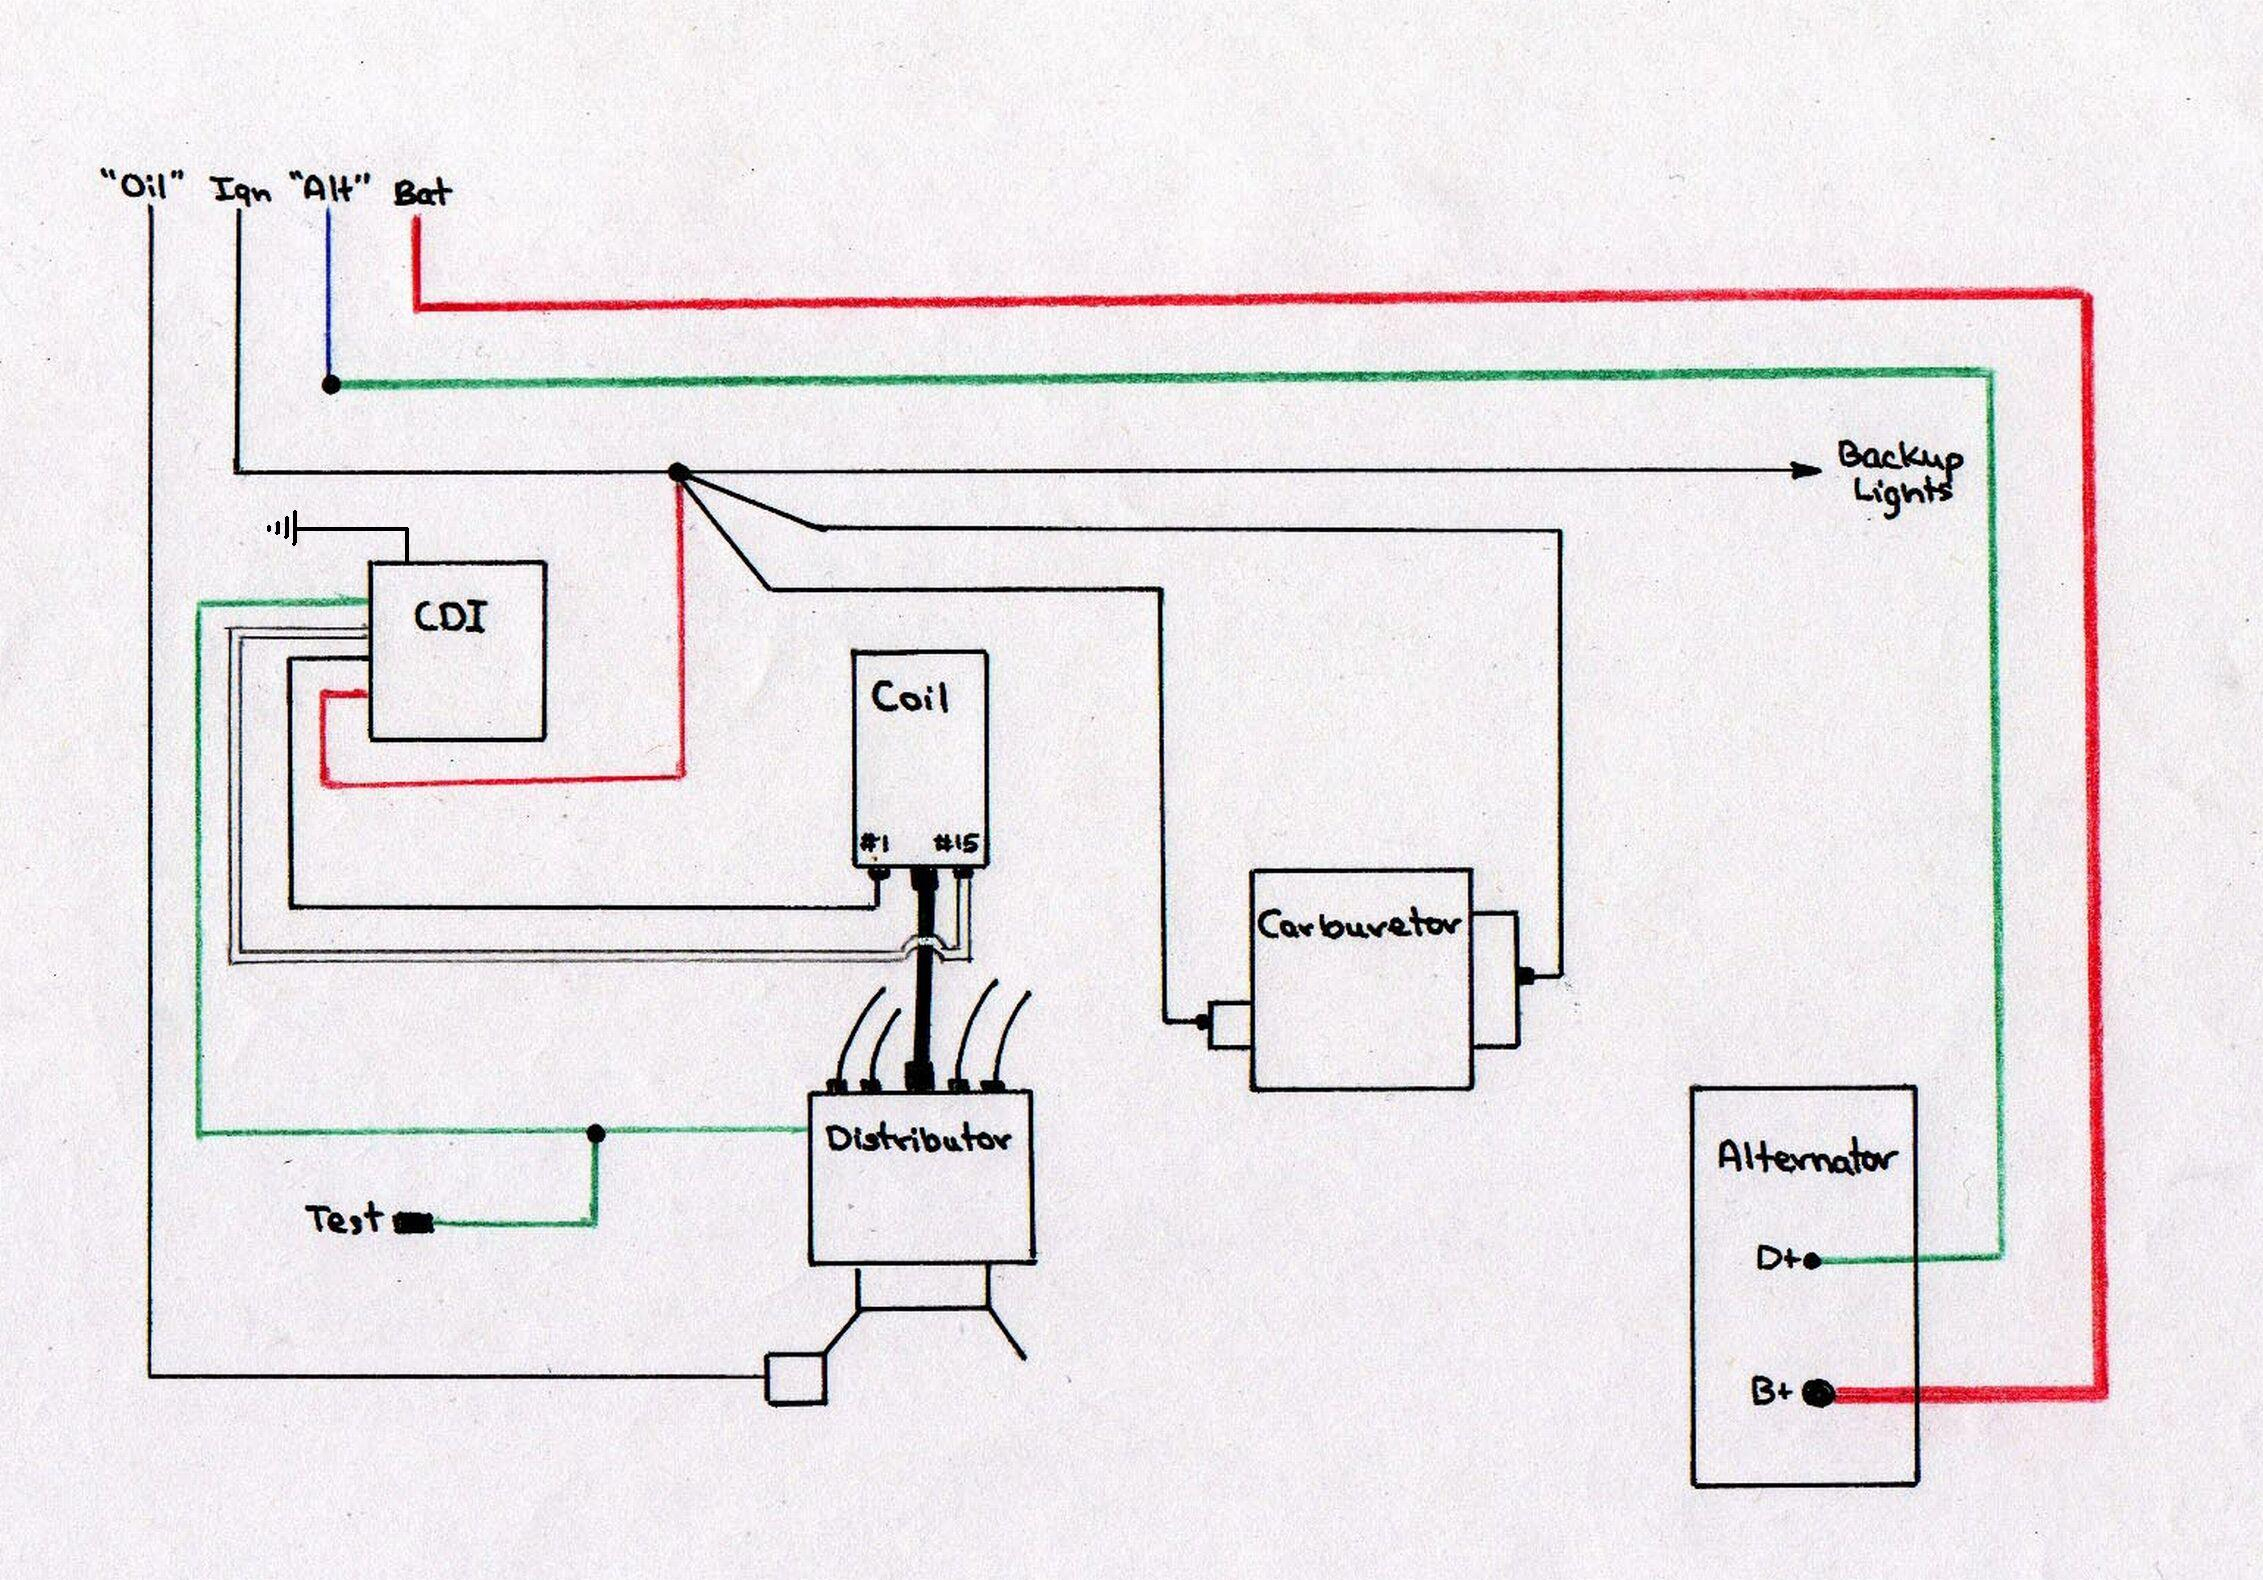 Cdi Ignition Wire - Today Wiring Diagram - 5 Pin Cdi Wiring Diagram